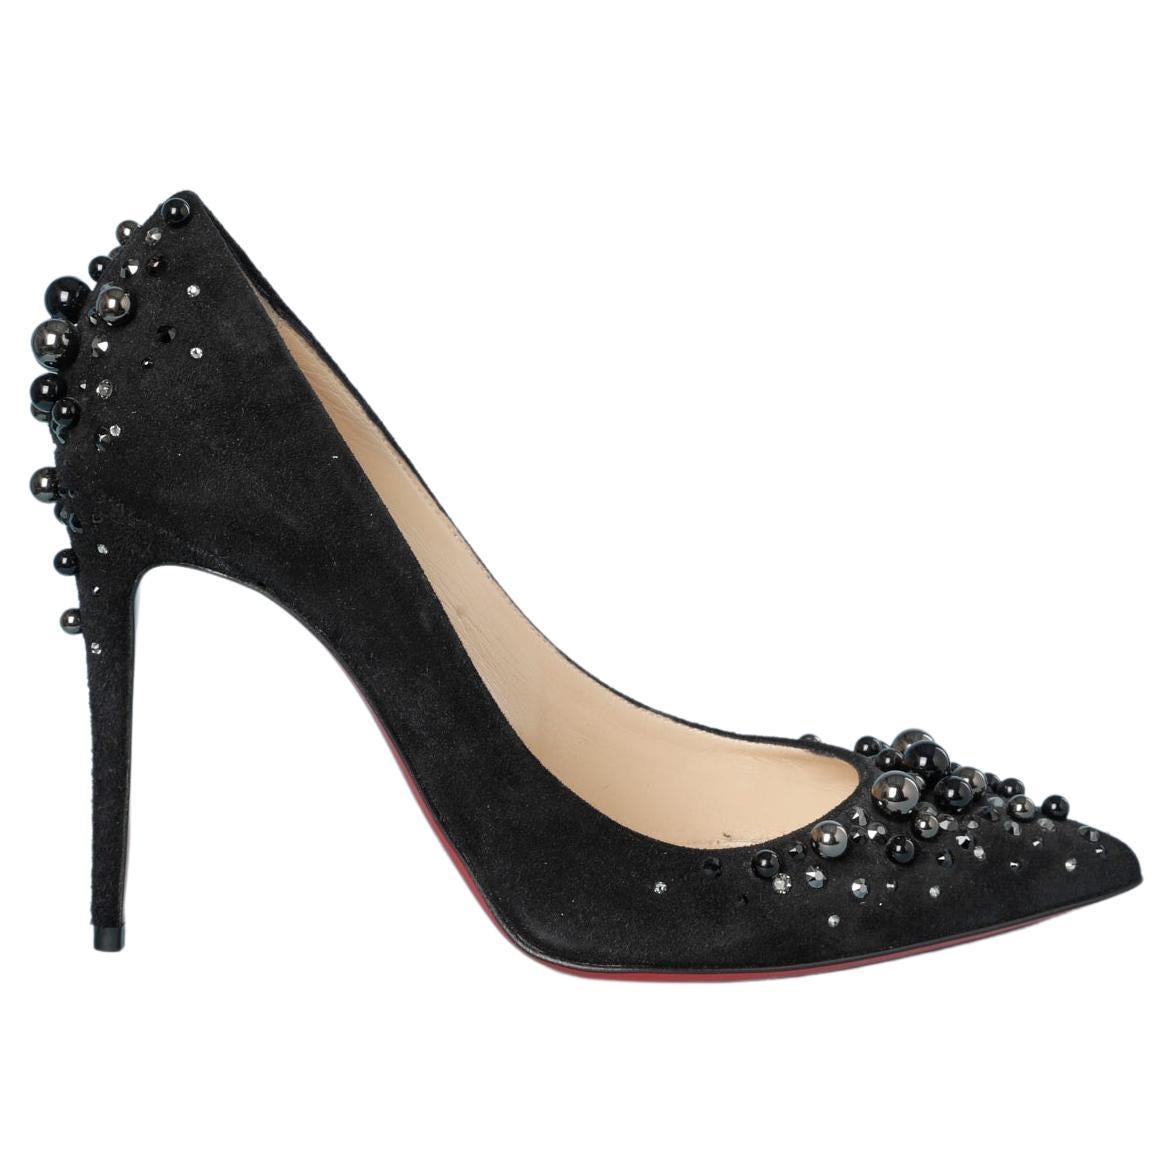 Black suede pump with black beads and rhinestone Christian Louboutin  For Sale